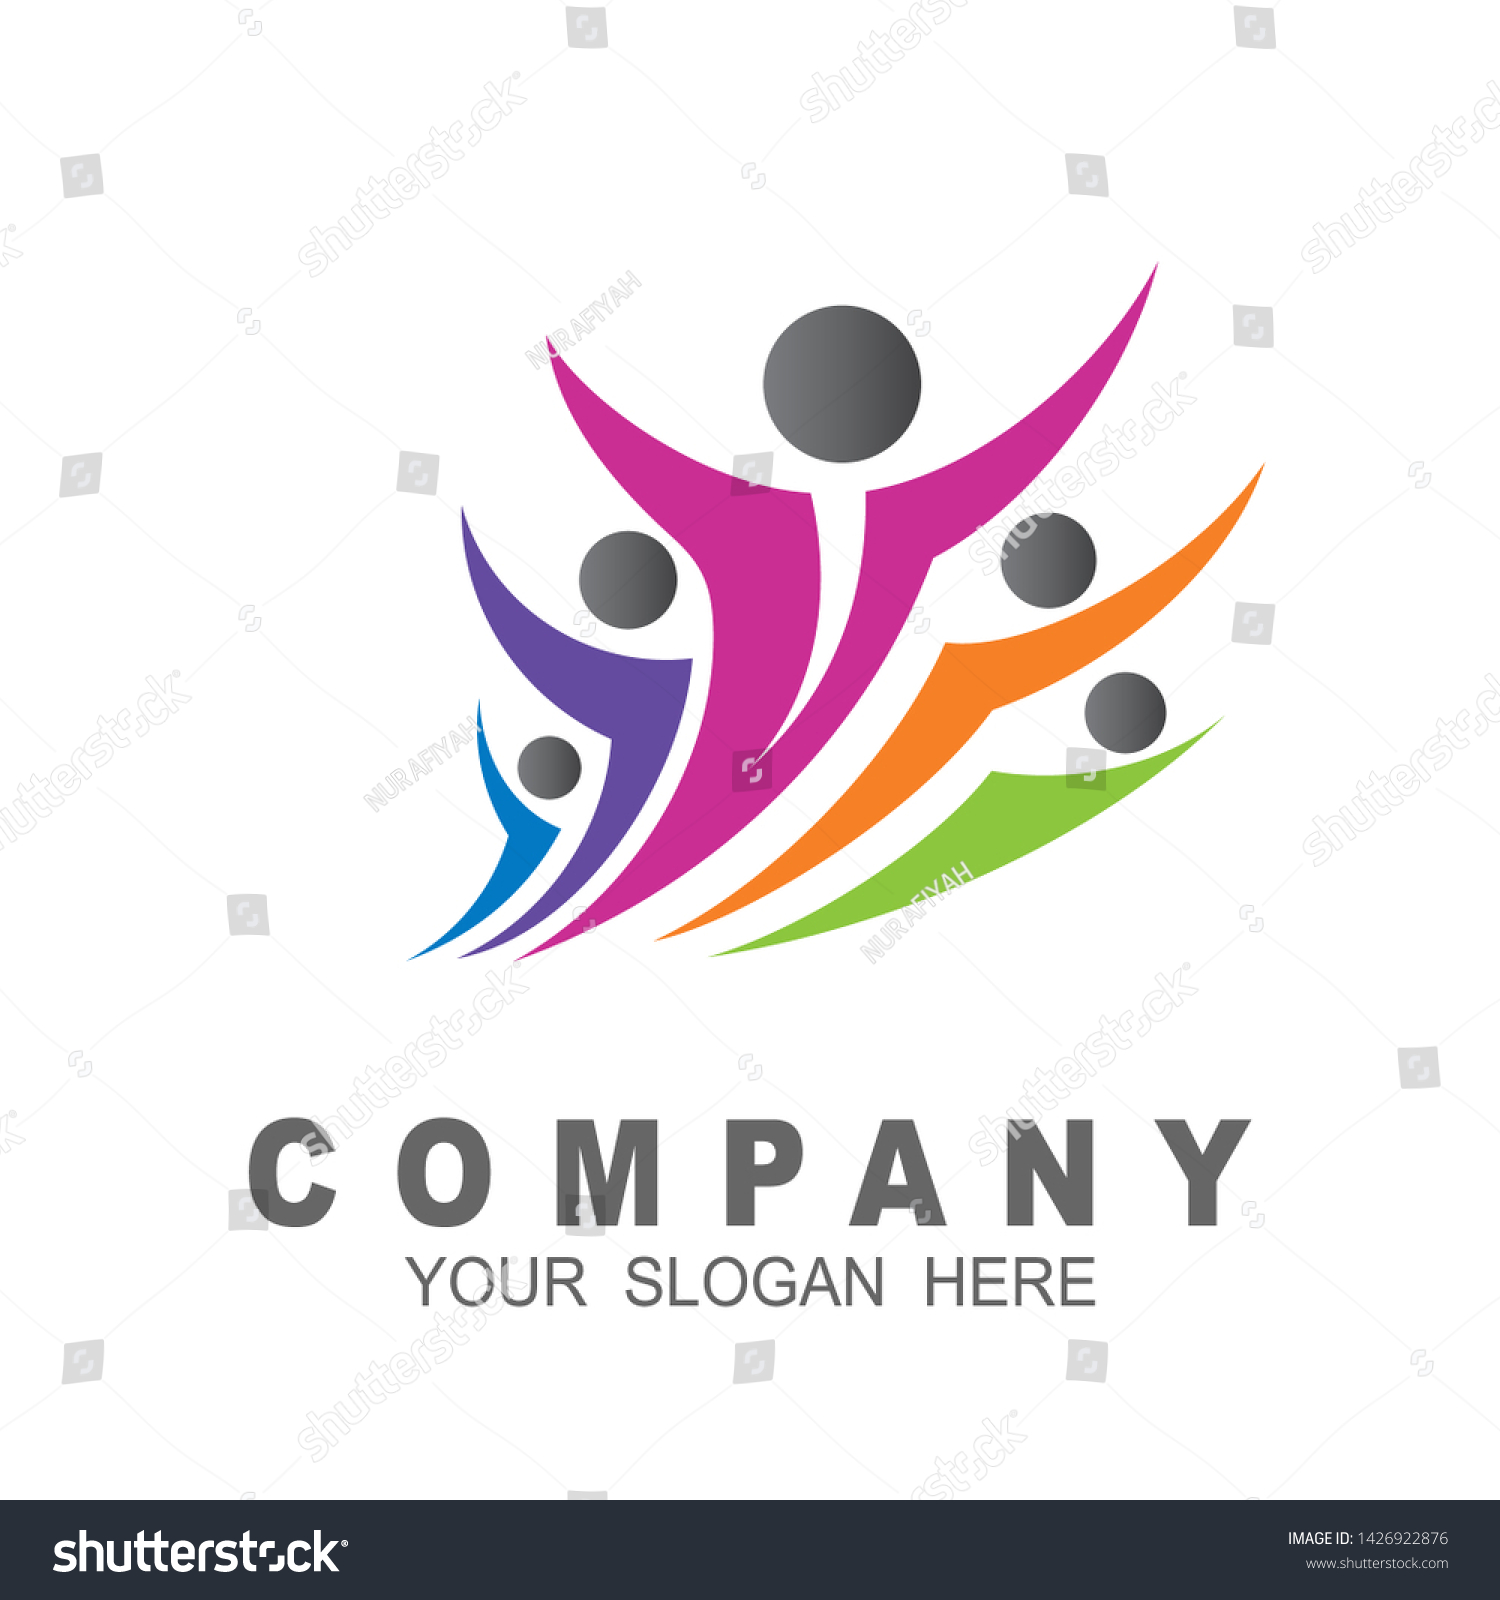 People Care Logo Design Template Social Stock Vector (Royalty Free ...